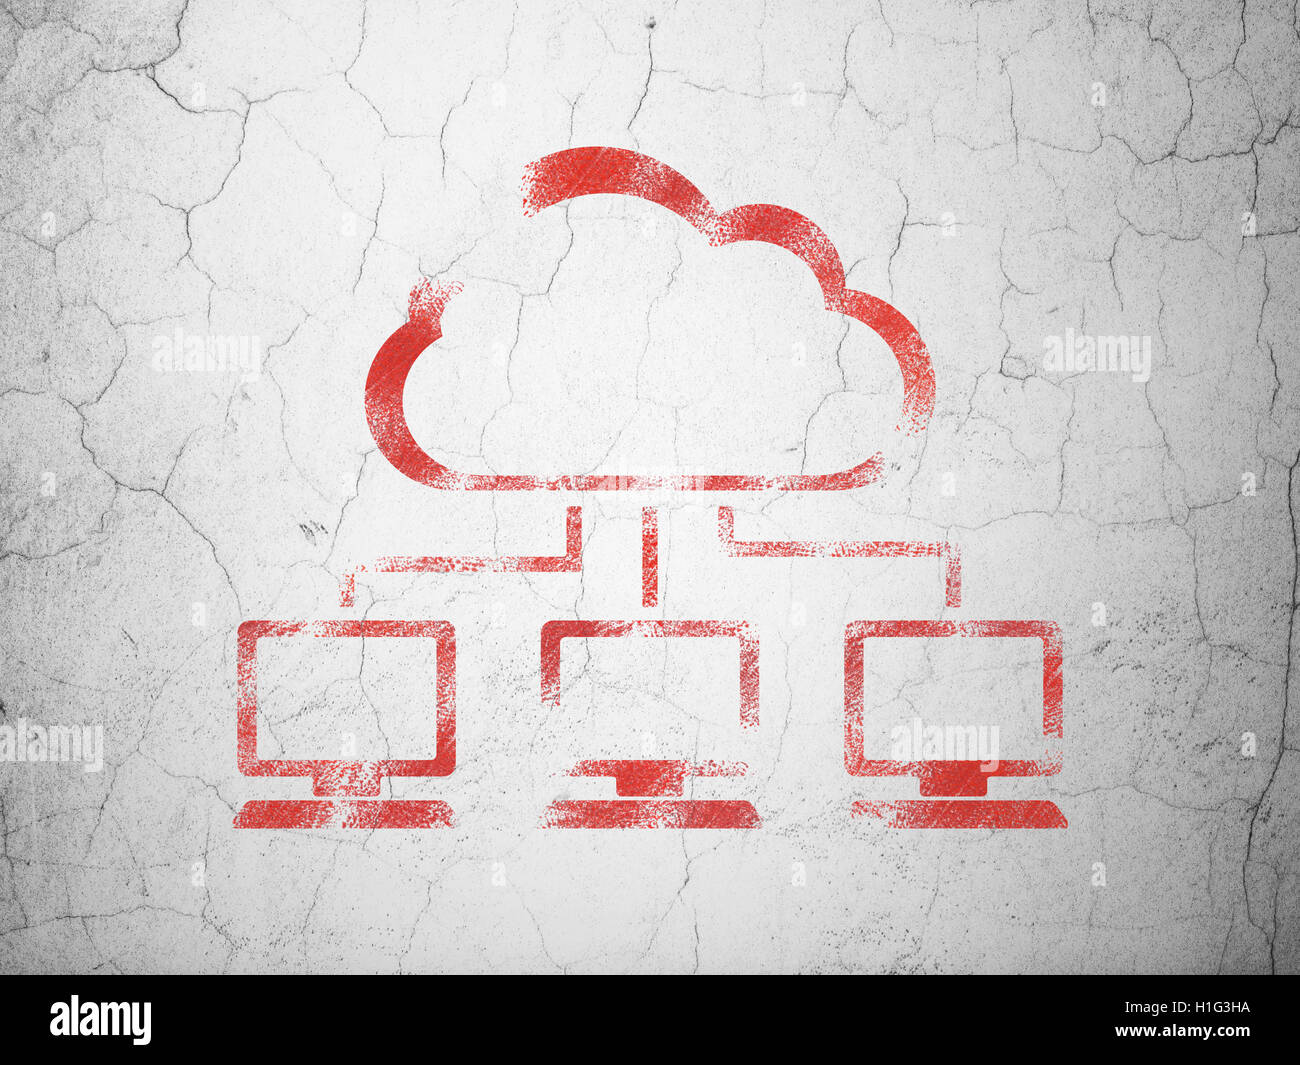 Cloud technology concept: Cloud Network on wall background Stock Photo